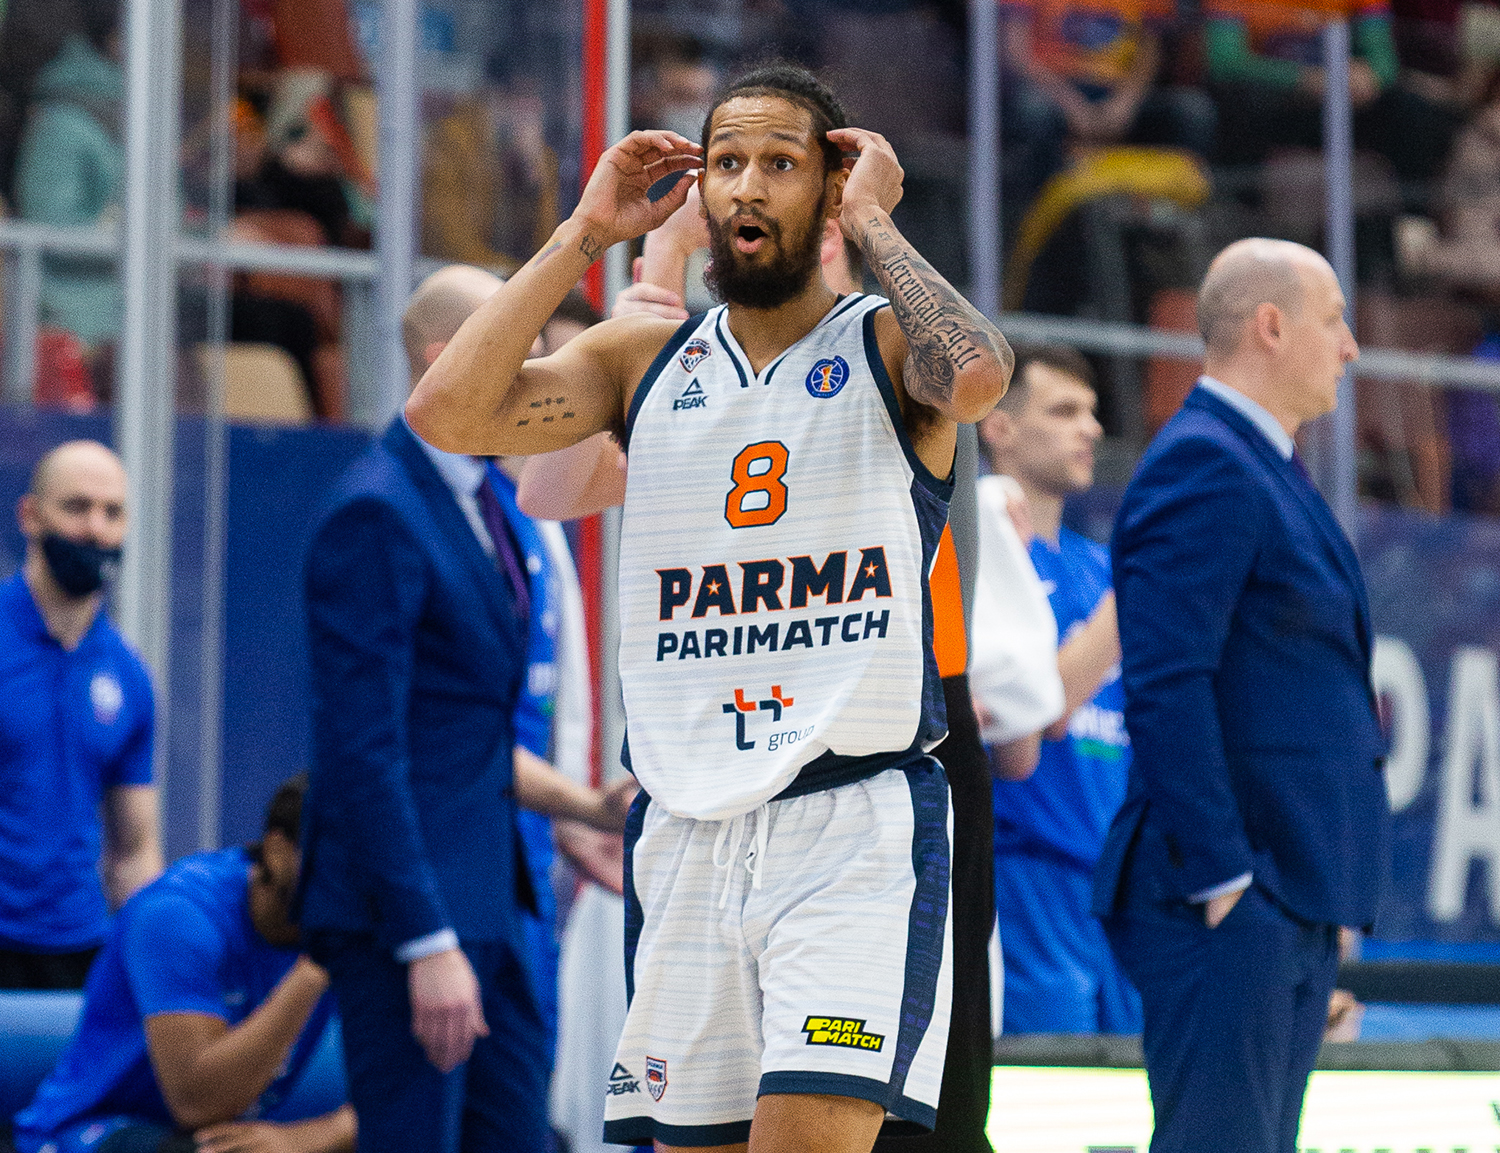 PARMA wins at home, even with Kalev’s leader performance